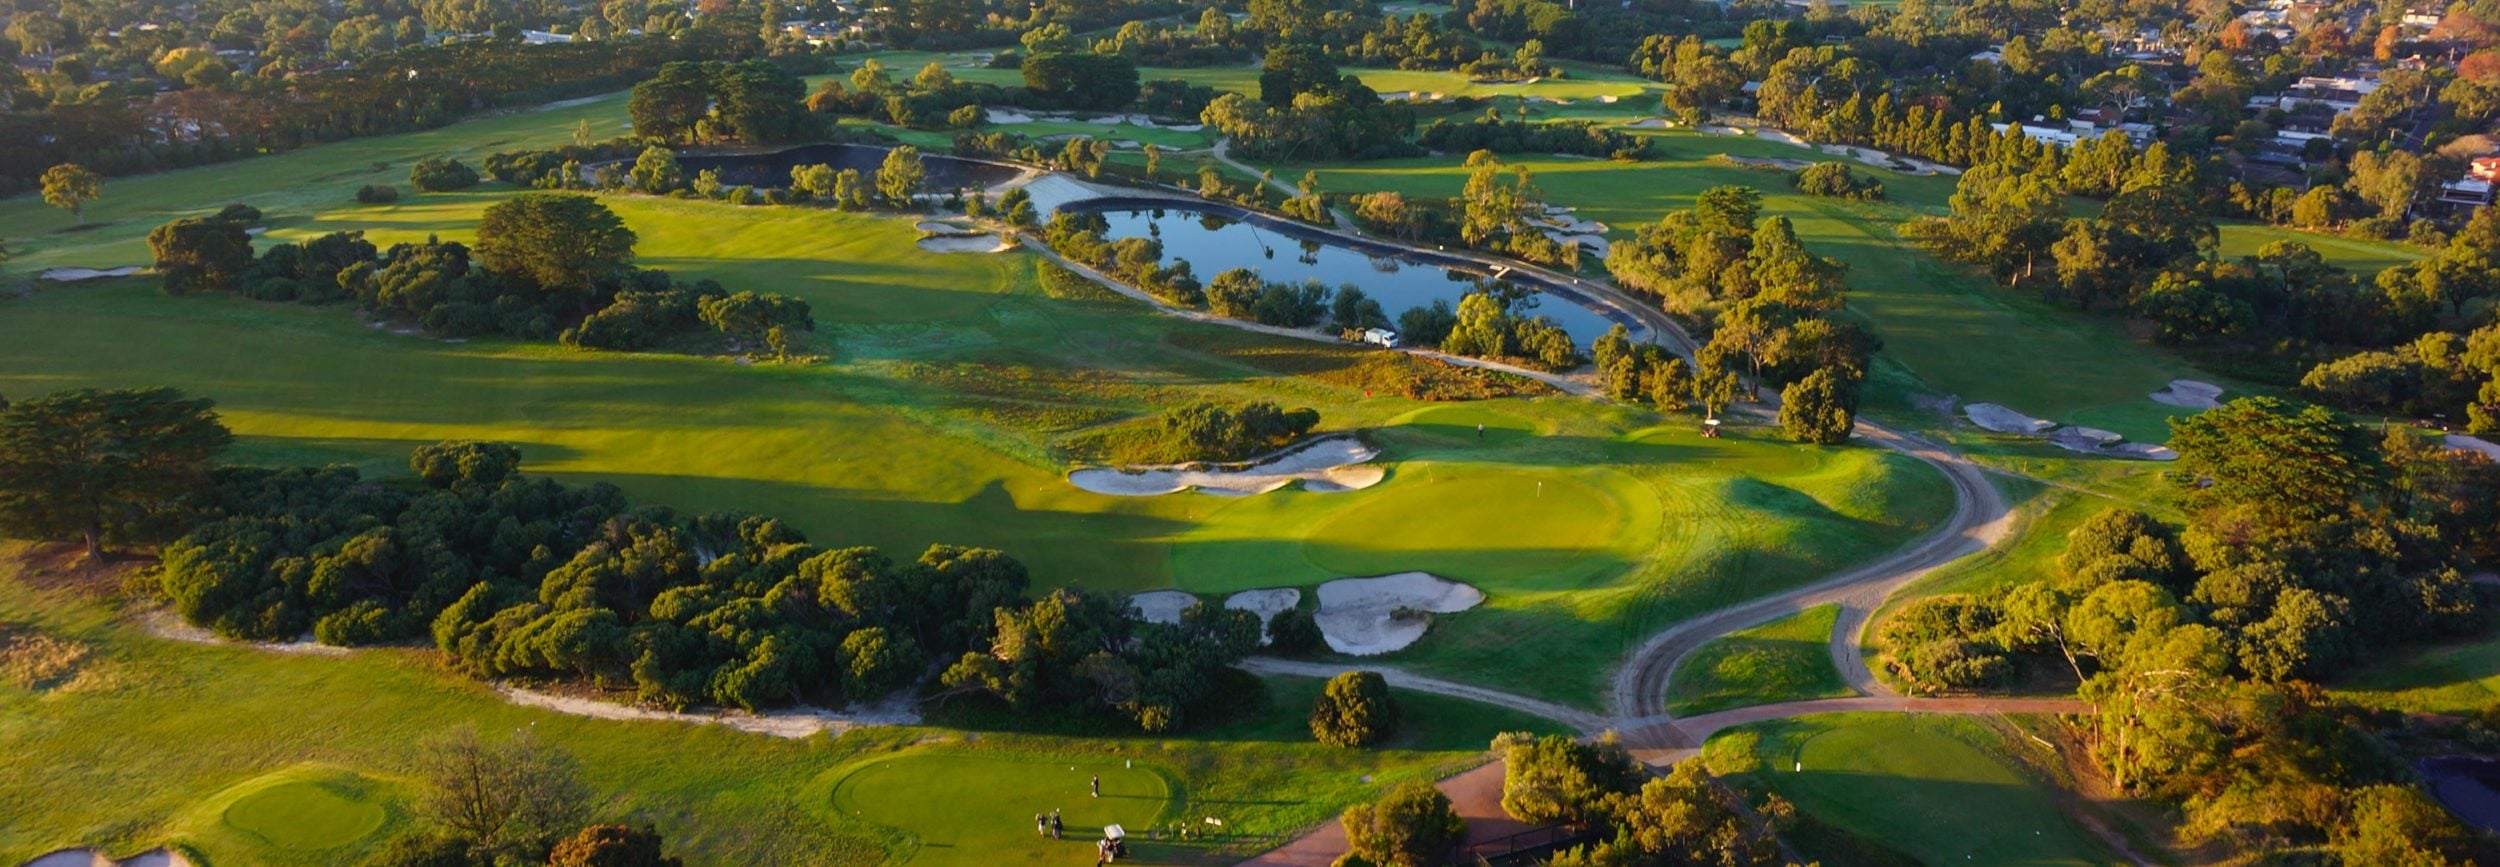 Aerial footage of the West golf course at Royal Melbourne golf club